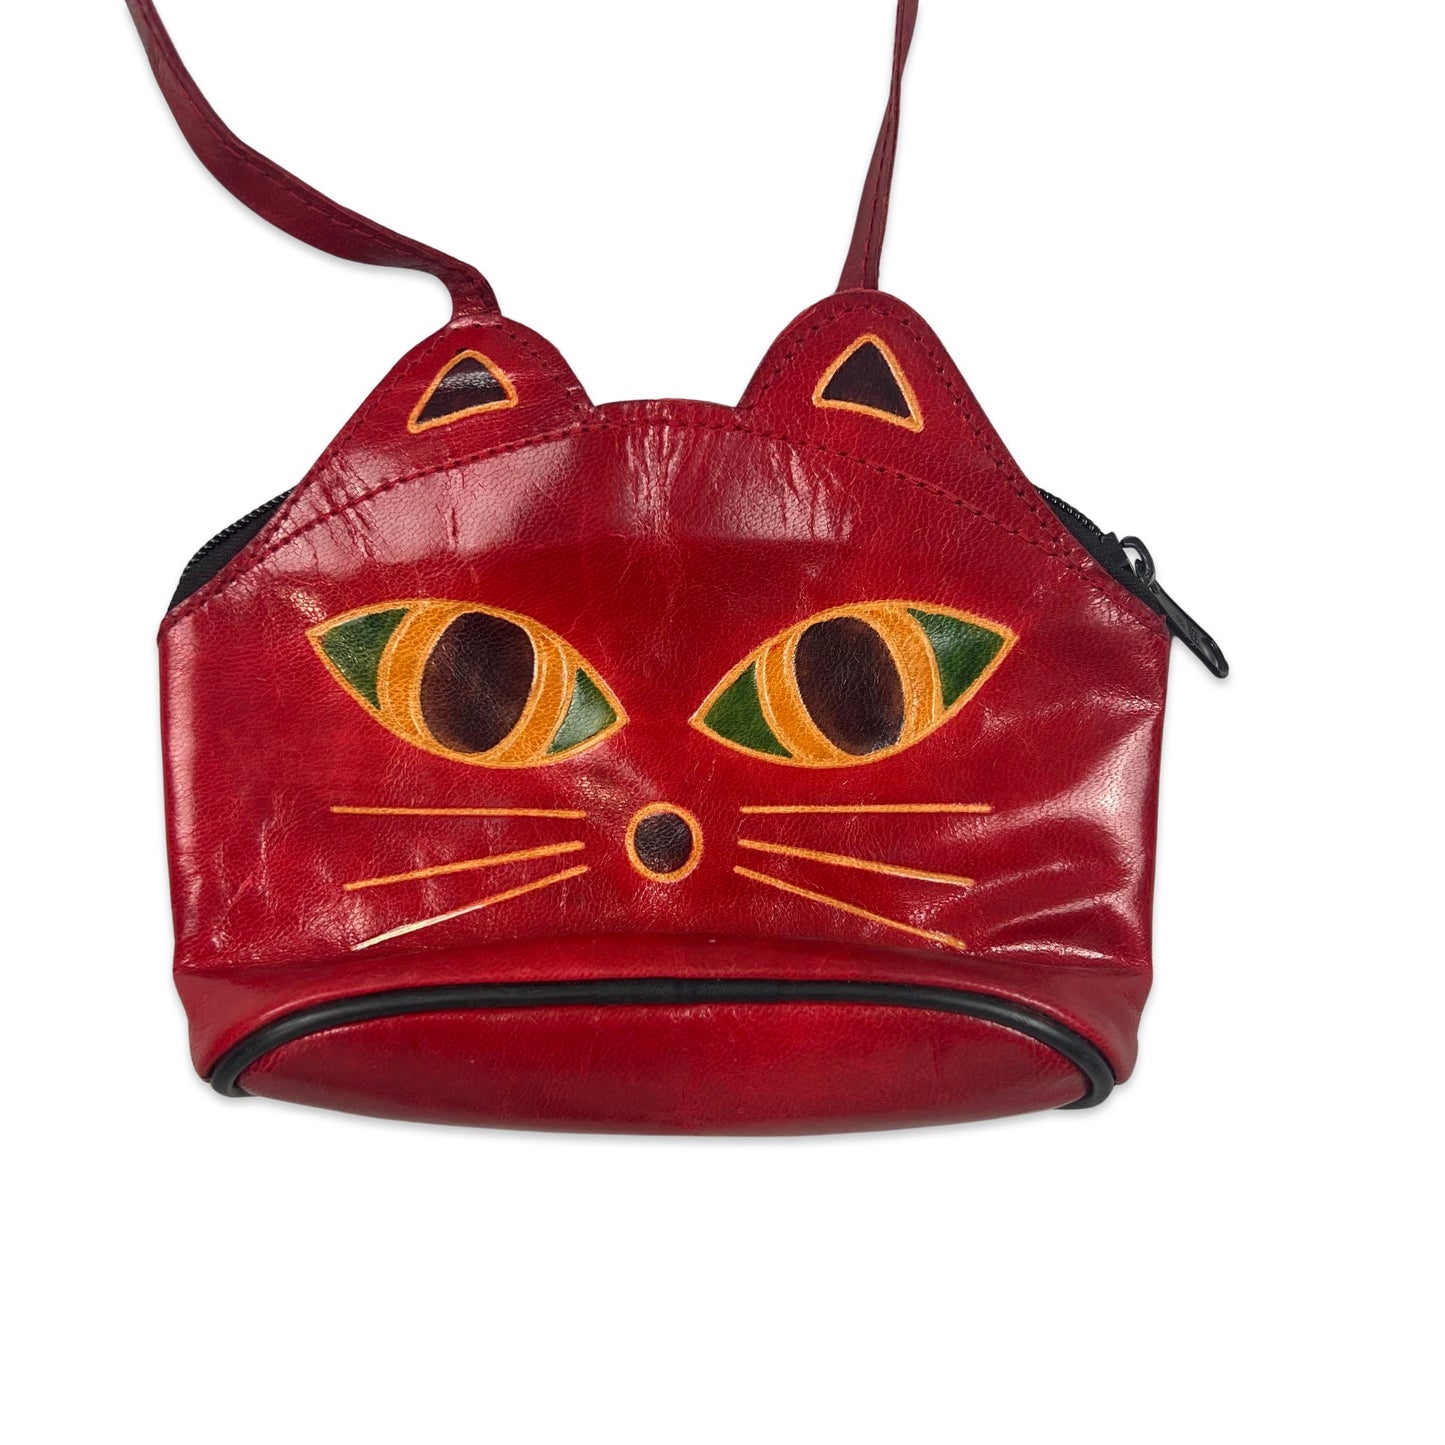 90s 00s Vintage Cat Crossbody Leather Bag Red Yellow Green